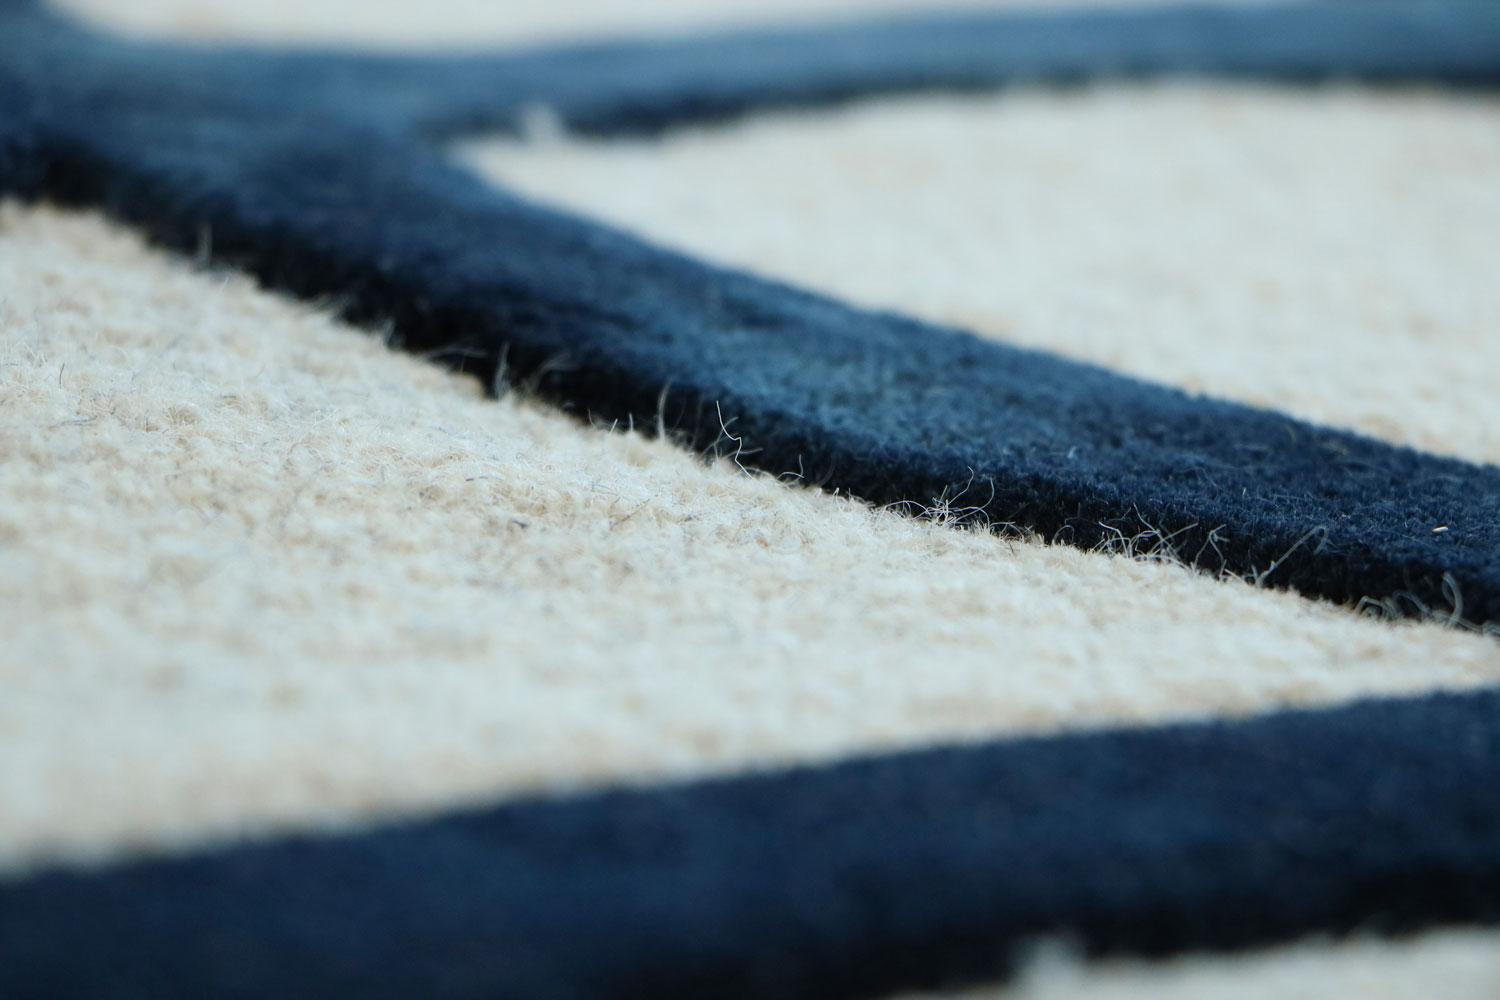 Indian Contemporary Hand Woven Blue New Zealand Wool Rug by Deanna Comellini 150x200 cm For Sale